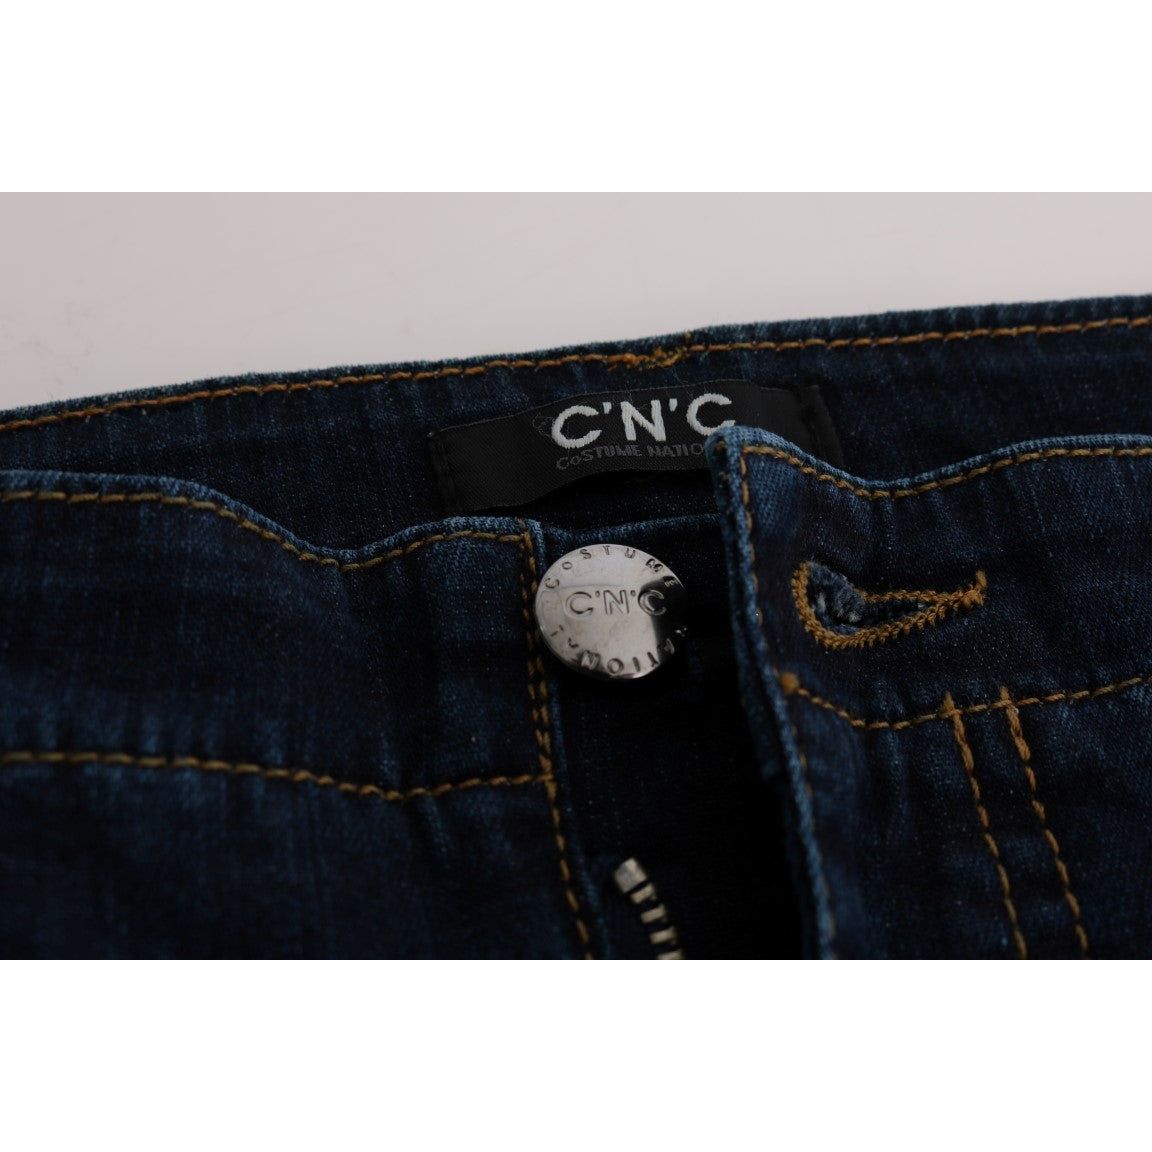 Costume National Chic Flared Cotton Jeans in Blue Jeans & Pants blue-cotton-bootcut-flared-jeans